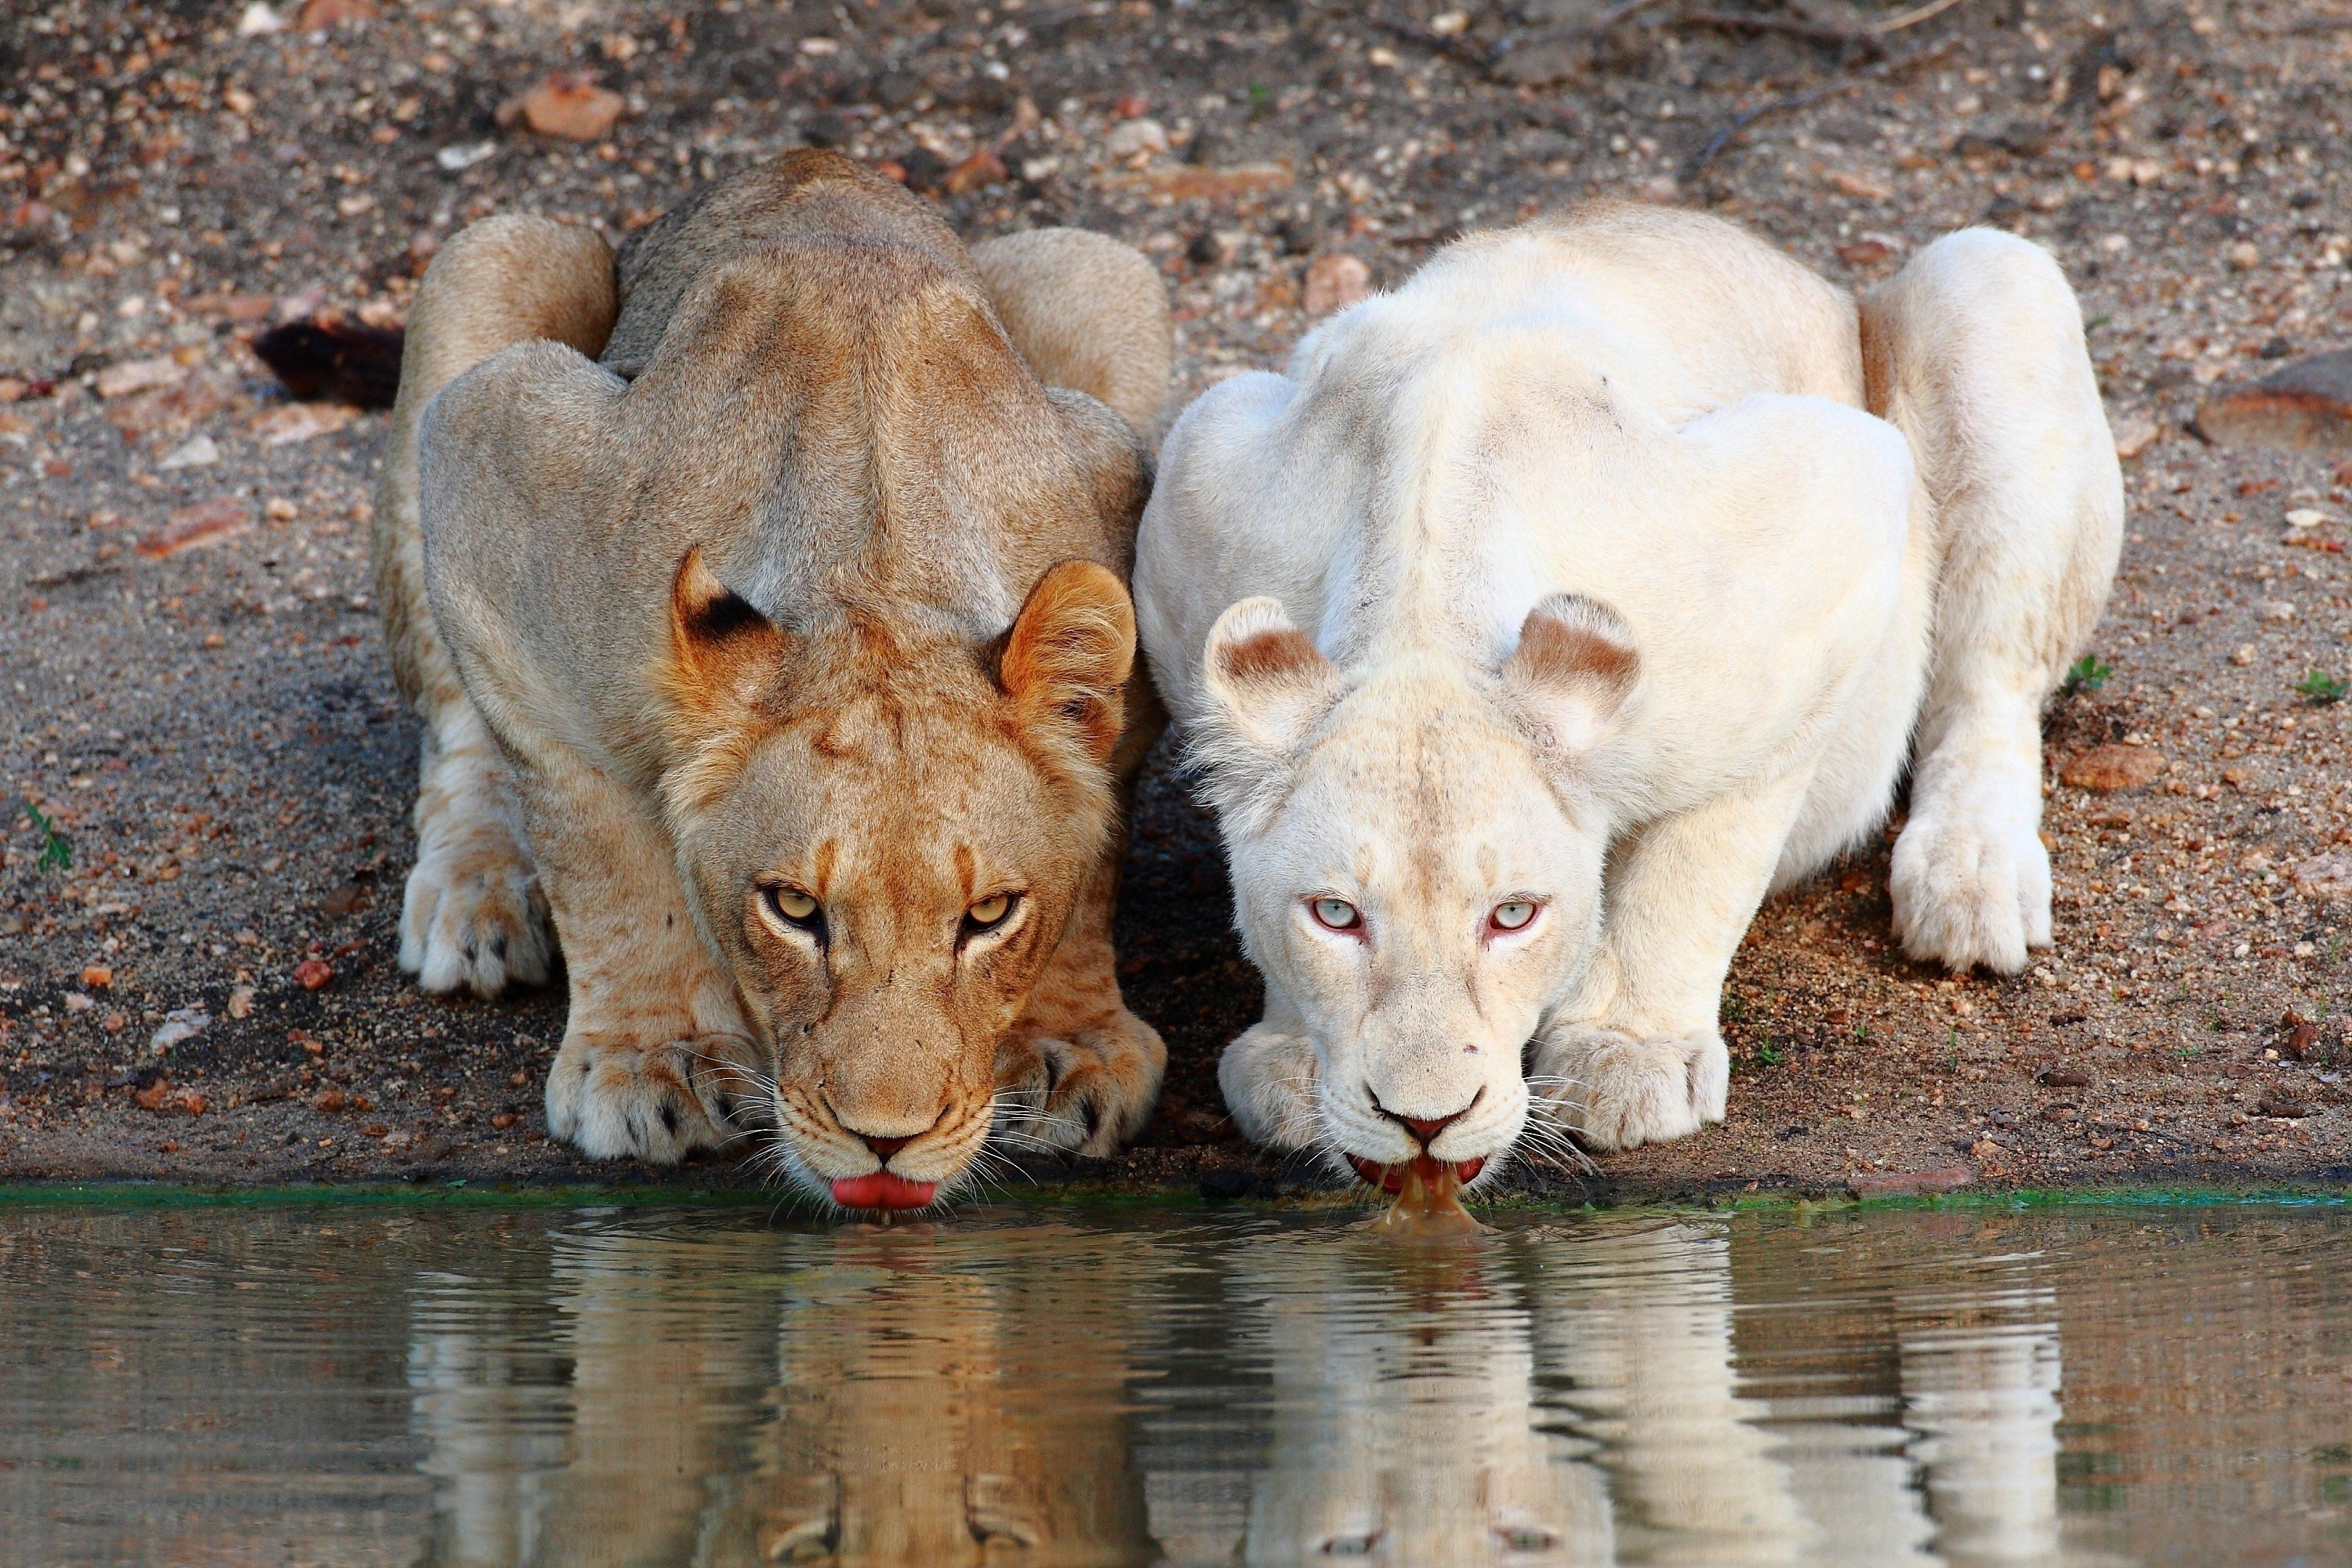 Golden Yellow And White Lion Drinkign Water Together - White Lion Hd , HD Wallpaper & Backgrounds